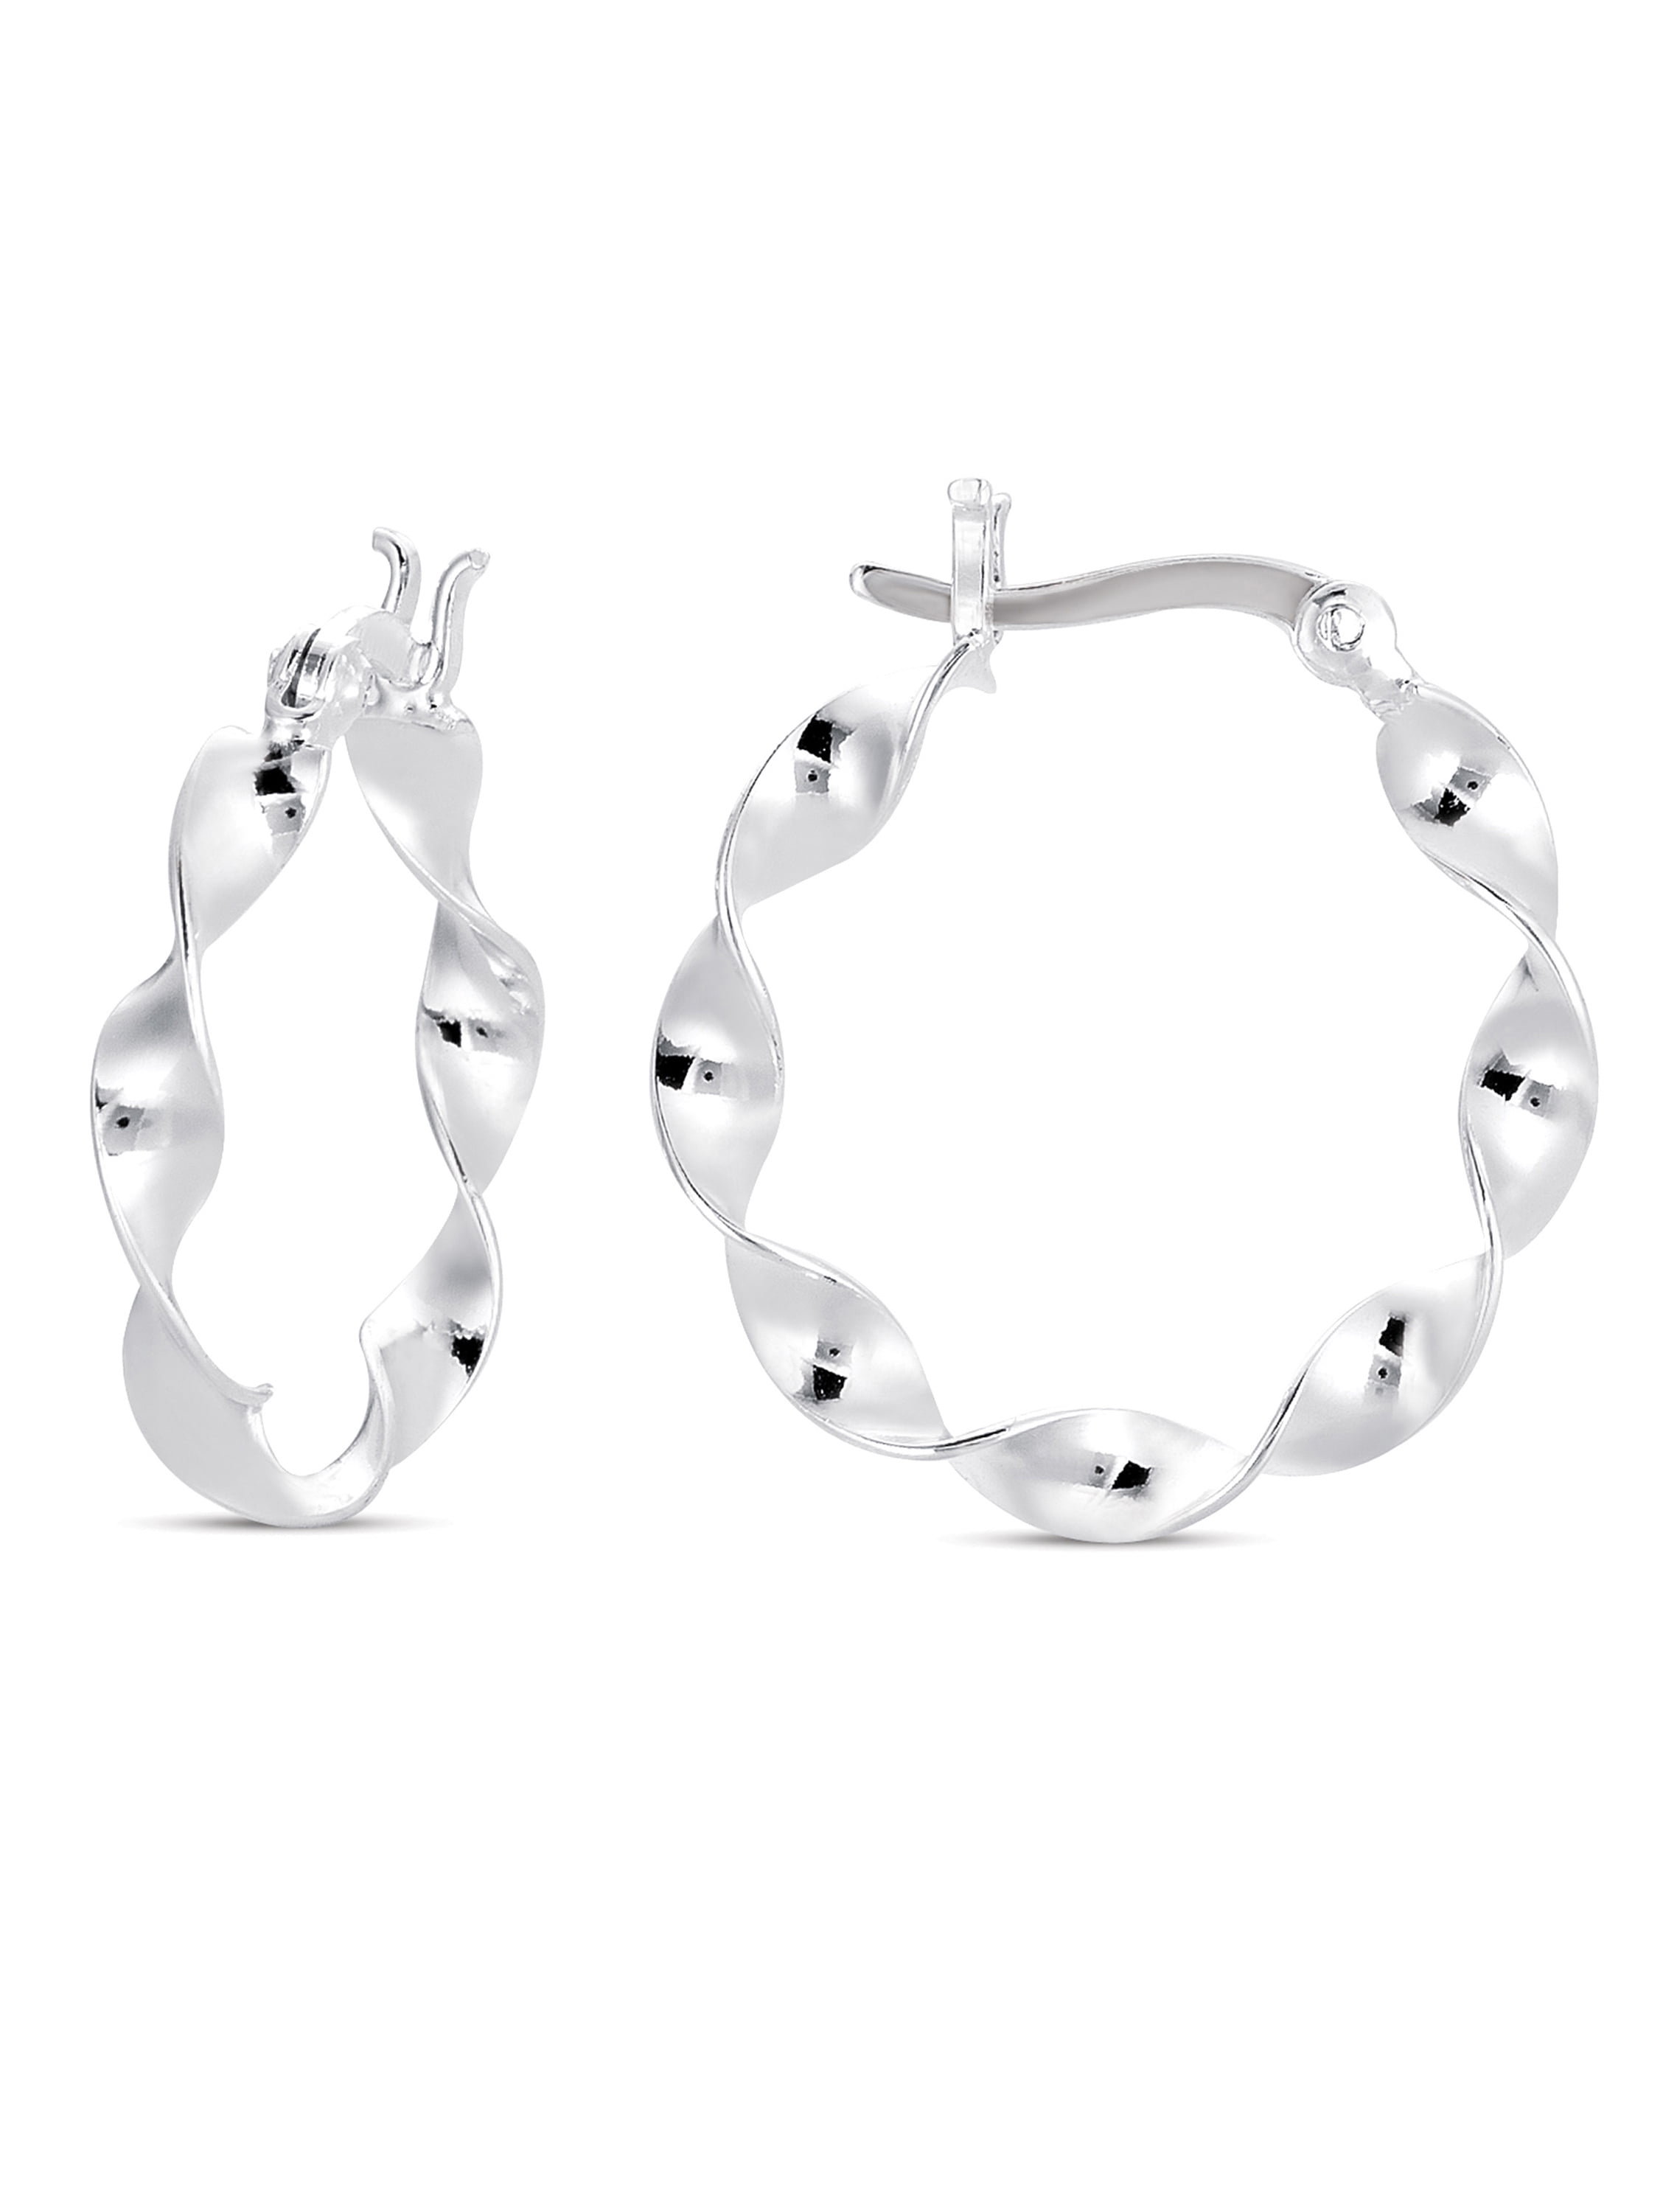 316L Surgical Stainless Steel Post Back Hoop Patterned Earrings 38mm 